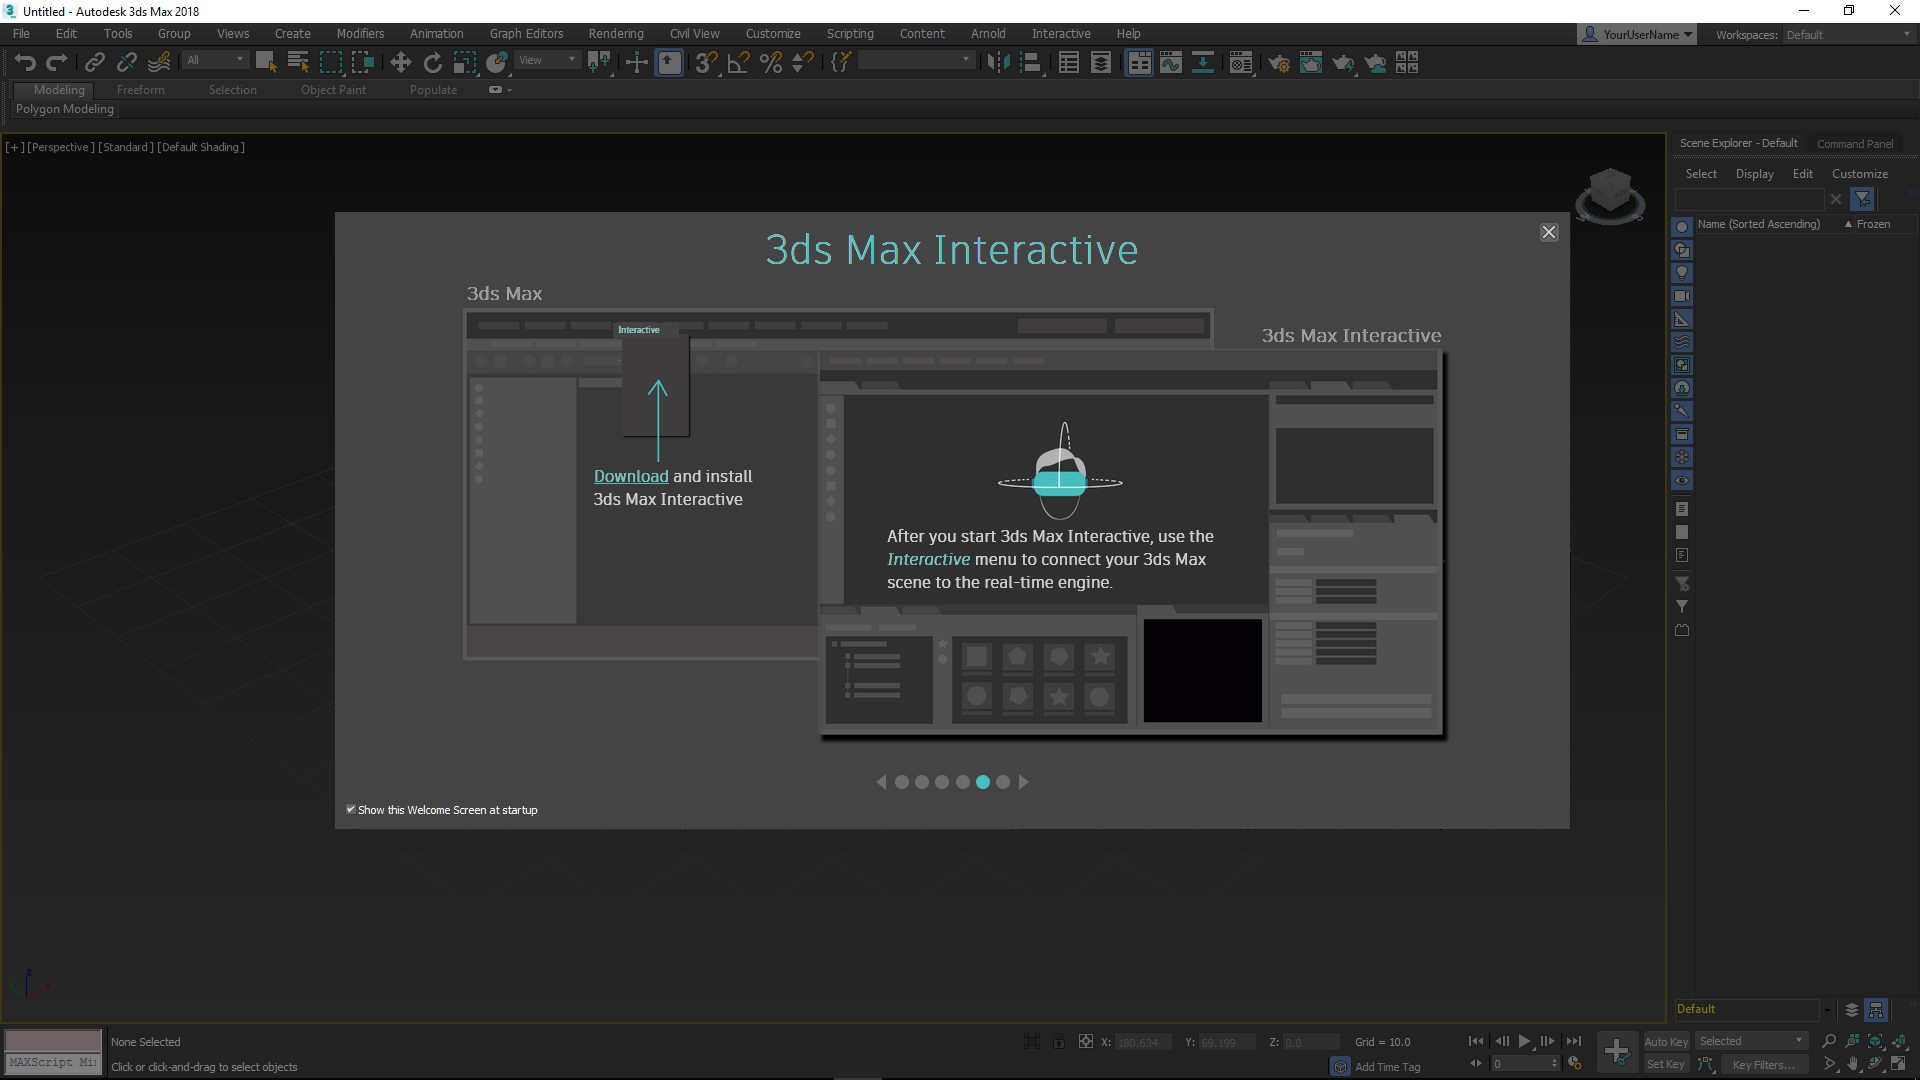 3ds max 2019 download full